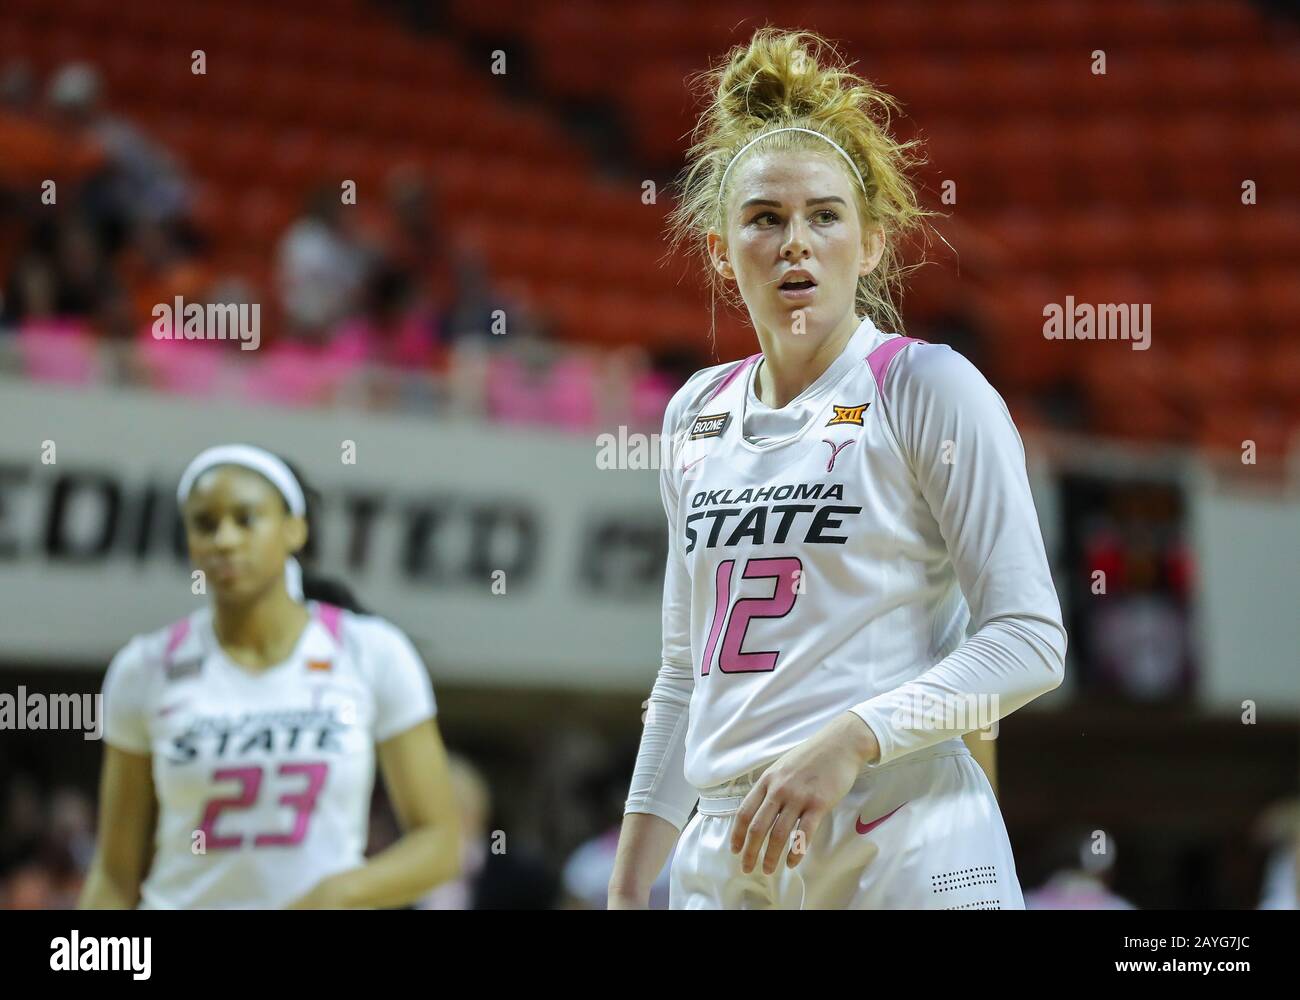 Stillwater, OK, USA. 08th Feb, 2020. Oklahoma State Cowgirls forward Vivian Gray (12) during a basketball game between the West Virginia Mountaineers and Oklahoma State Cowgirls at Gallagher-Iba Arena in Stillwater, OK. Gray Siegel/CSM/Alamy Live News Stock Photo